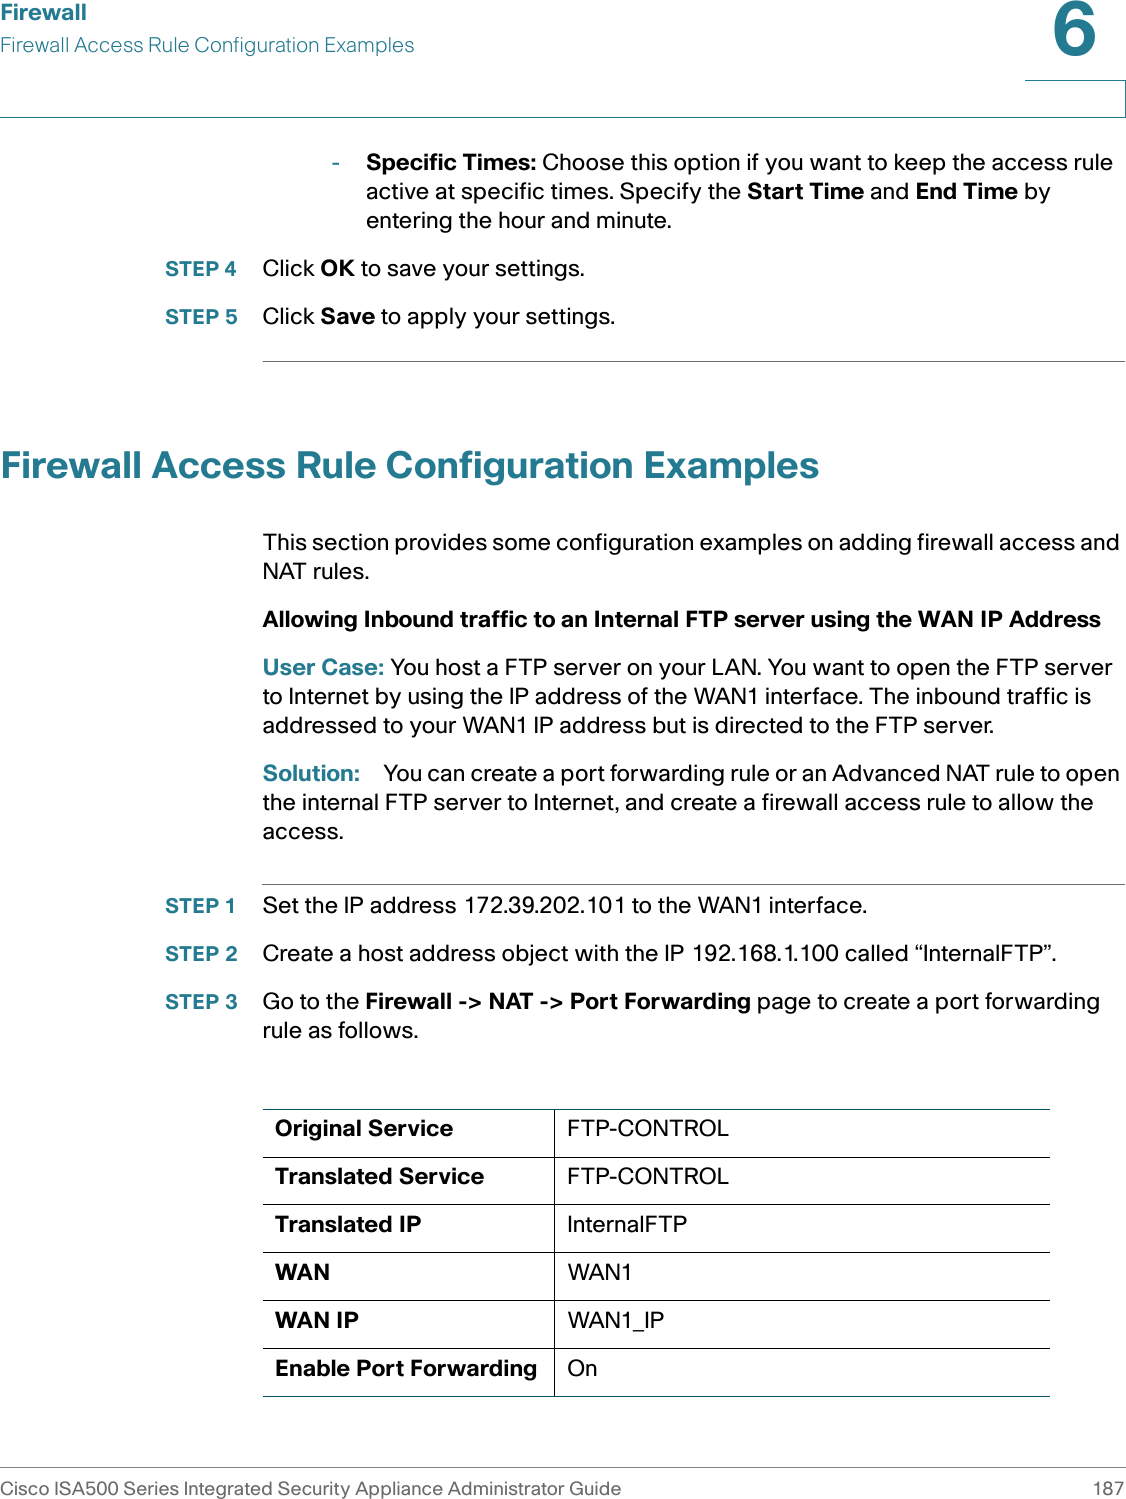 FirewallFirewall Access Rule Configuration ExamplesCisco ISA500 Series Integrated Security Appliance Administrator Guide 1876 -Specific Times: Choose this option if you want to keep the access rule active at specific times. Specify the Start Time and End Time by entering the hour and minute. STEP 4 Click OK to save your settings. STEP 5 Click Save to apply your settings. Firewall Access Rule Configuration ExamplesThis section provides some configuration examples on adding firewall access and NAT rules. Allowing Inbound traffic to an Internal FTP server using the WAN IP AddressUser Case: You host a FTP server on your LAN. You want to open the FTP server to Internet by using the IP address of the WAN1 interface. The inbound traffic is addressed to your WAN1 IP address but is directed to the FTP server. Solution: You can create a port forwarding rule or an Advanced NAT rule to open the internal FTP server to Internet, and create a firewall access rule to allow the access. STEP 1 Set the IP address 172.39.202.101 to the WAN1 interface.STEP 2 Create a host address object with the IP 192.168.1.100 called “InternalFTP”.STEP 3 Go to the Firewall -&gt; NAT -&gt; Port Forwarding page to create a port forwarding rule as follows. Original Service FTP-CONTROLTranslated Service FTP-CONTROLTranslated IP InternalFTPWAN WAN1WAN IP WAN1_IPEnable Port Forwarding On